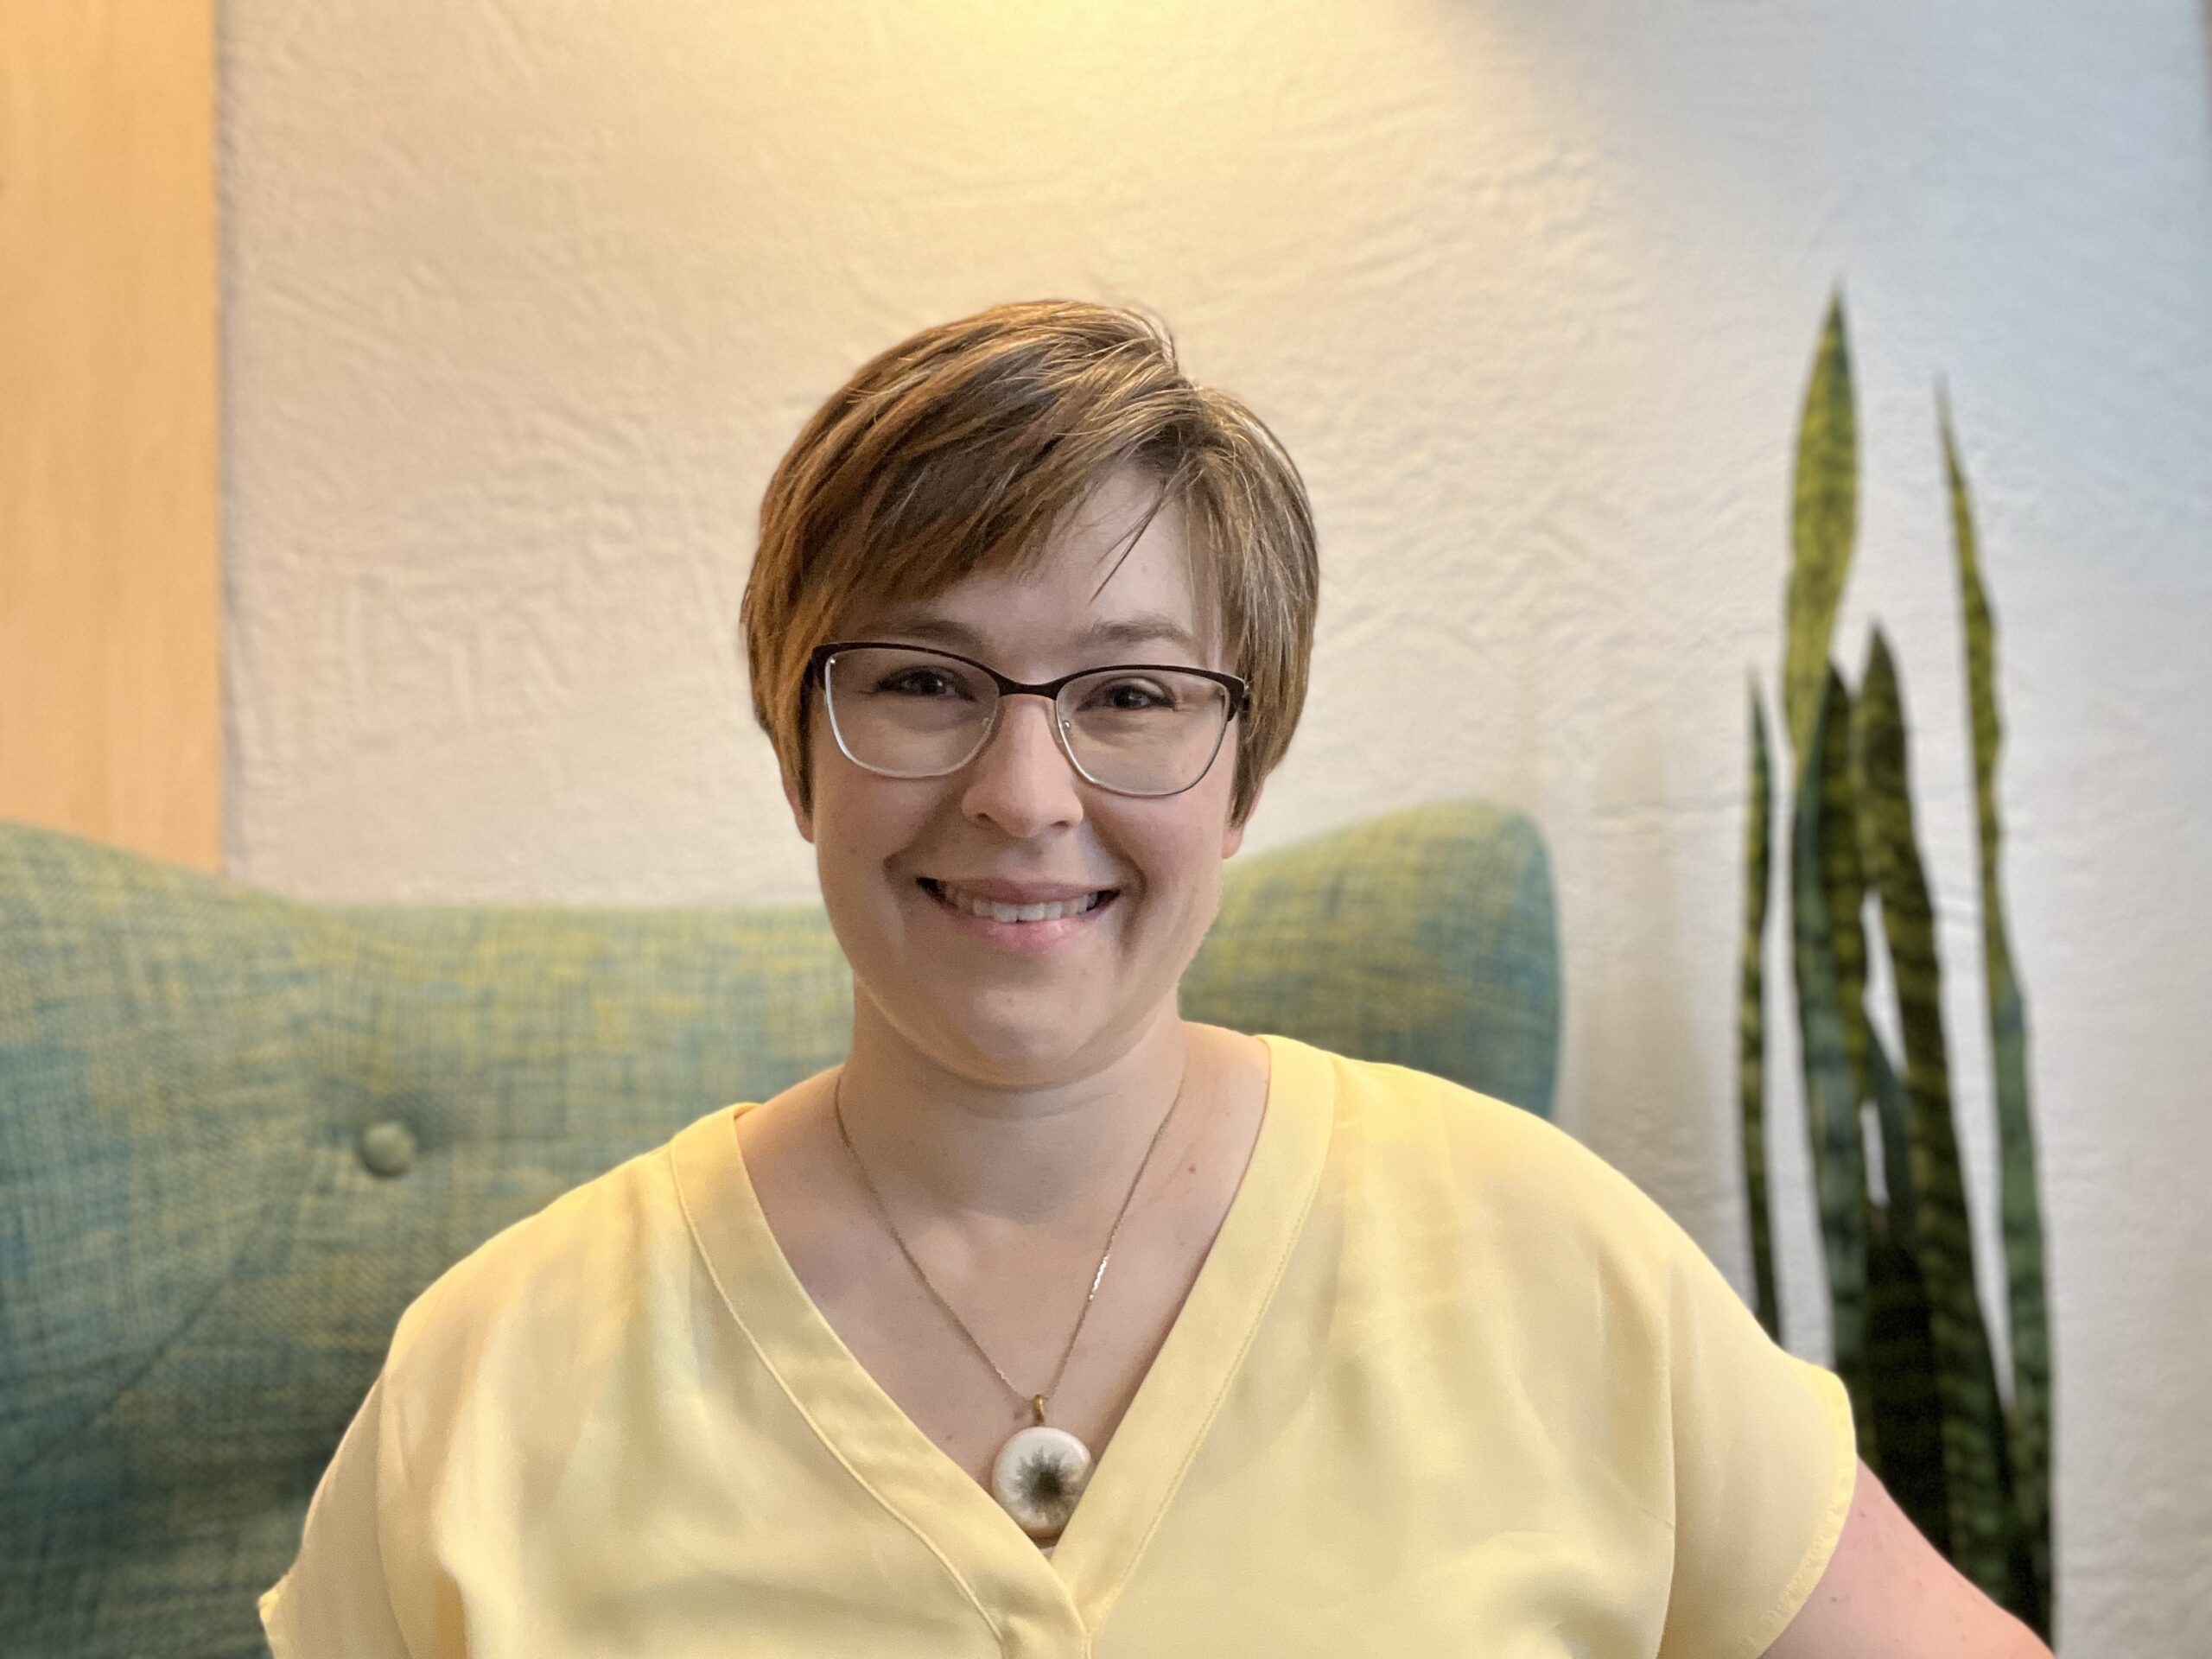 smiling woman with short brown hair and glasses, wearing a  yellow blouse and sitting in a green chair with a snake plant in background